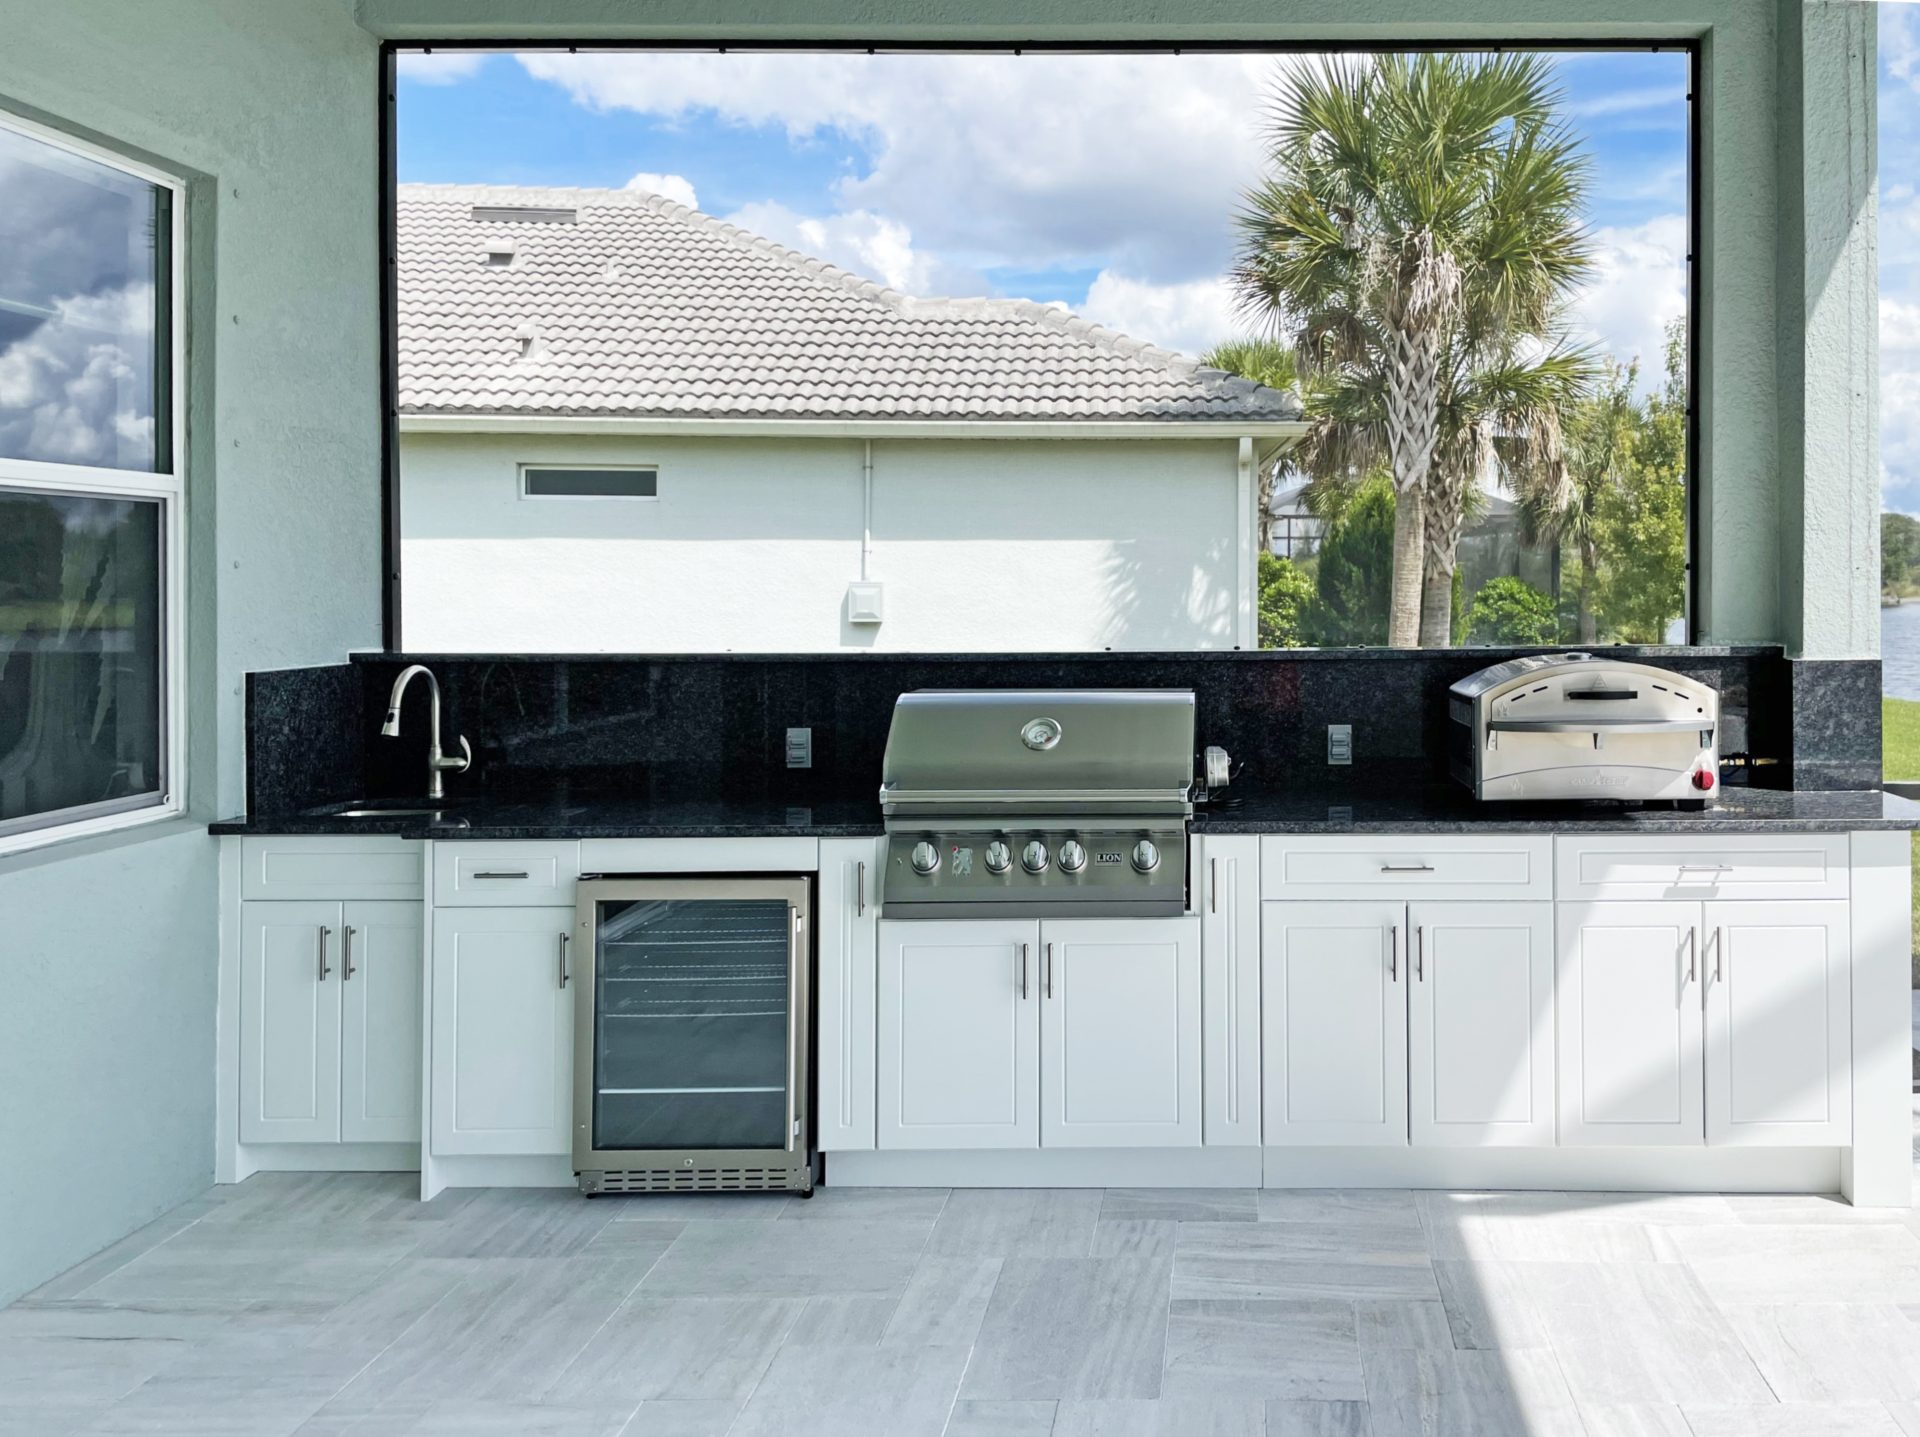 OUTDOOR KITCHEN 39. Custom outdoor kitchen in Venice, FL. Kitchen features white, sport style cabinets. Appliances include Lion grill, Camp Chef pizza oven, glass front refrigerator and stainless bar pulls.